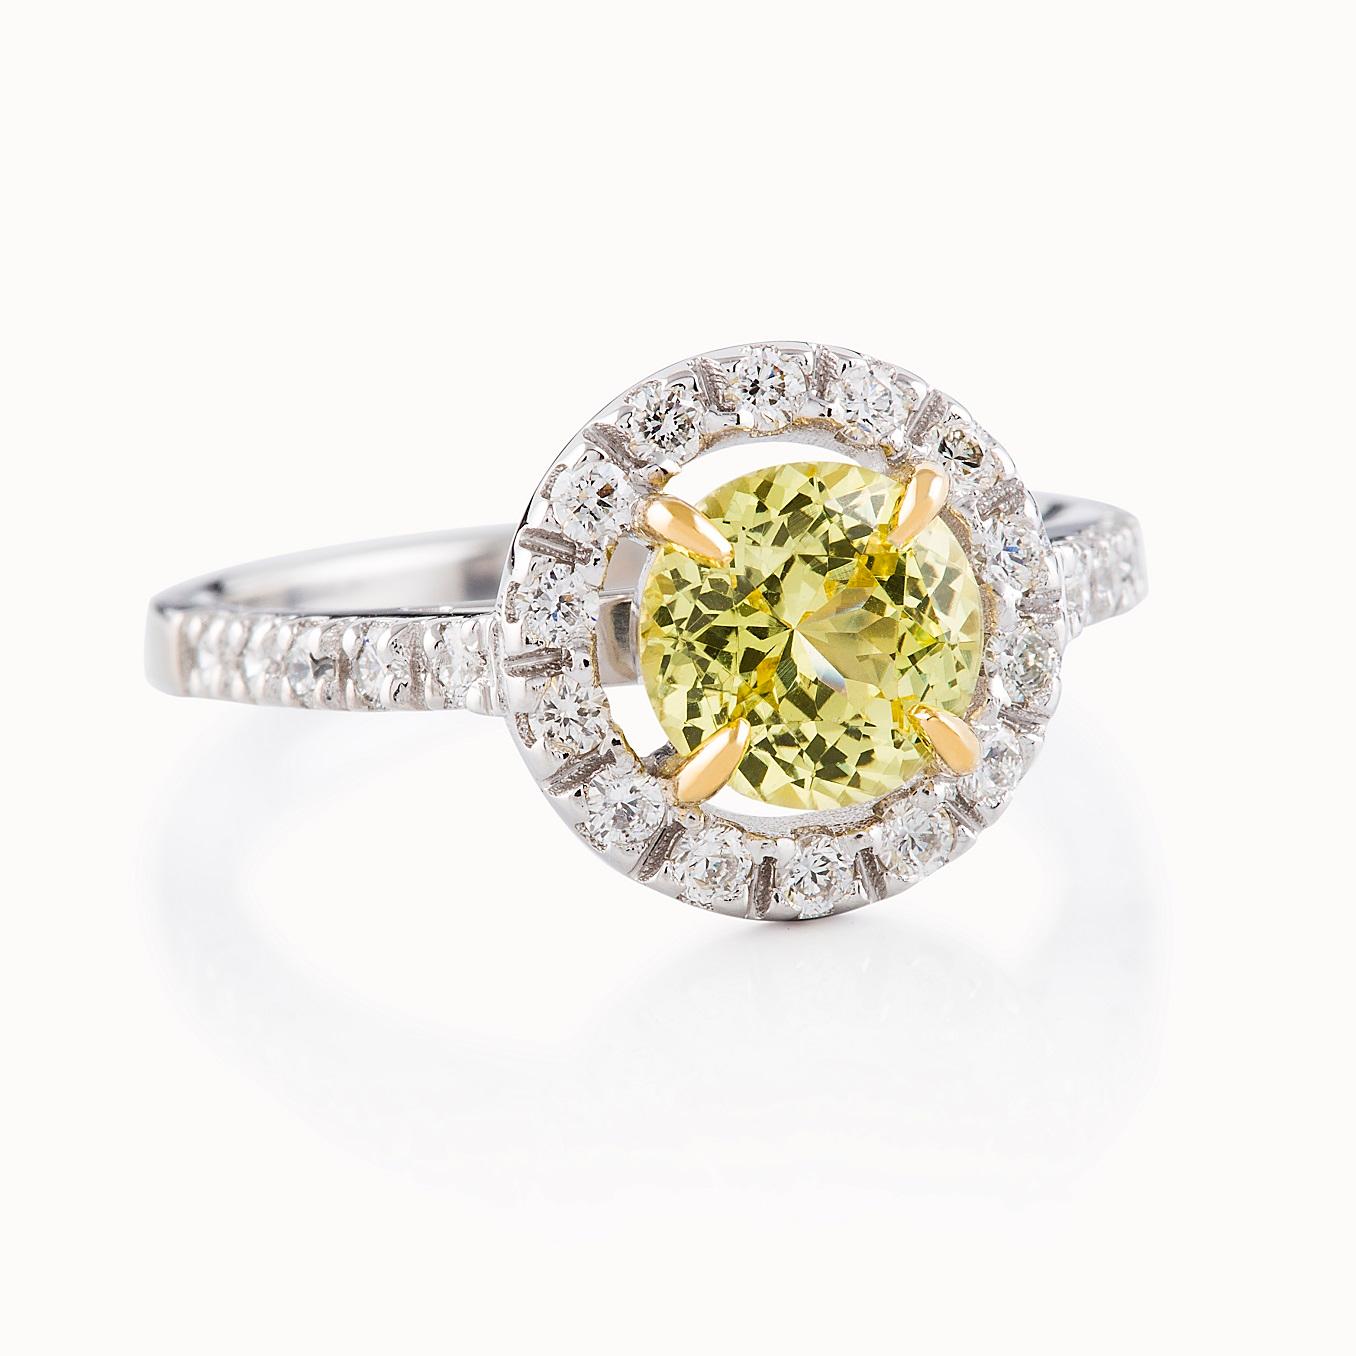 Women's 1.33 Carat Round Yellow Sapphire and Diamond Cluster Ring in 18 Carat Gold